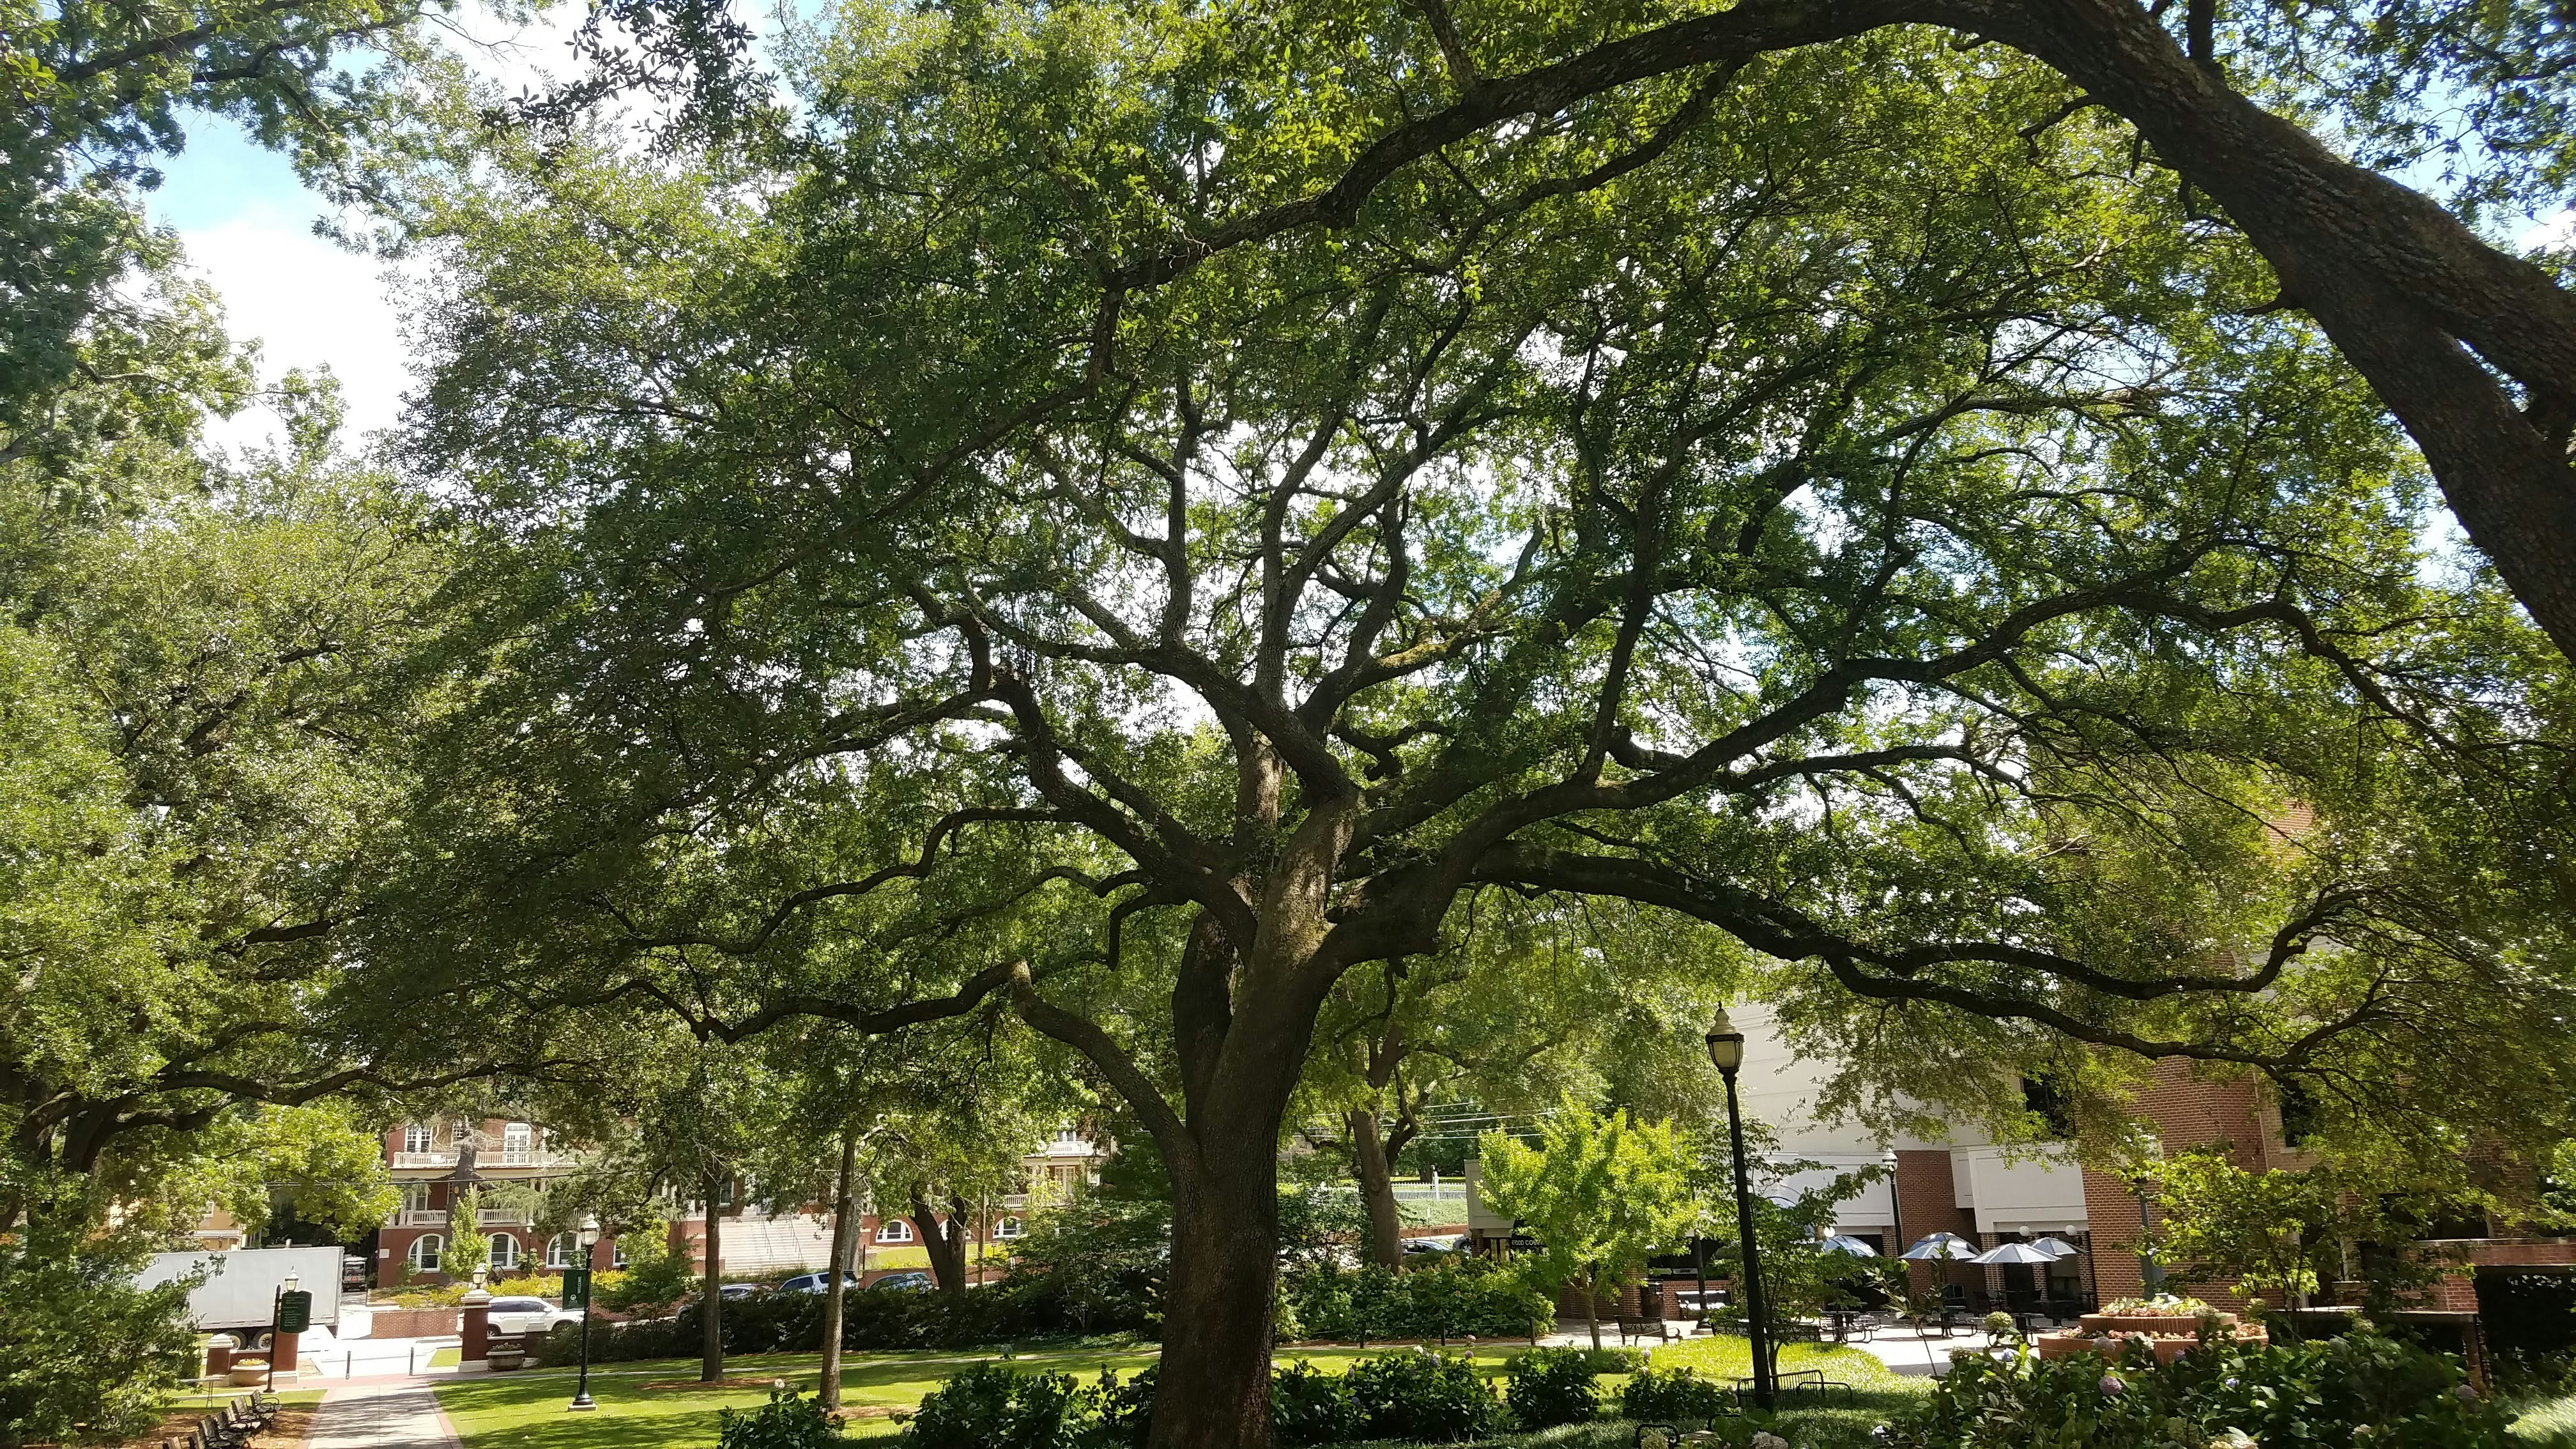 Large oak trees spread their canopies over the green lawns and brick buildings of the Georgia College and State University campus in Milledgeville, Georgia